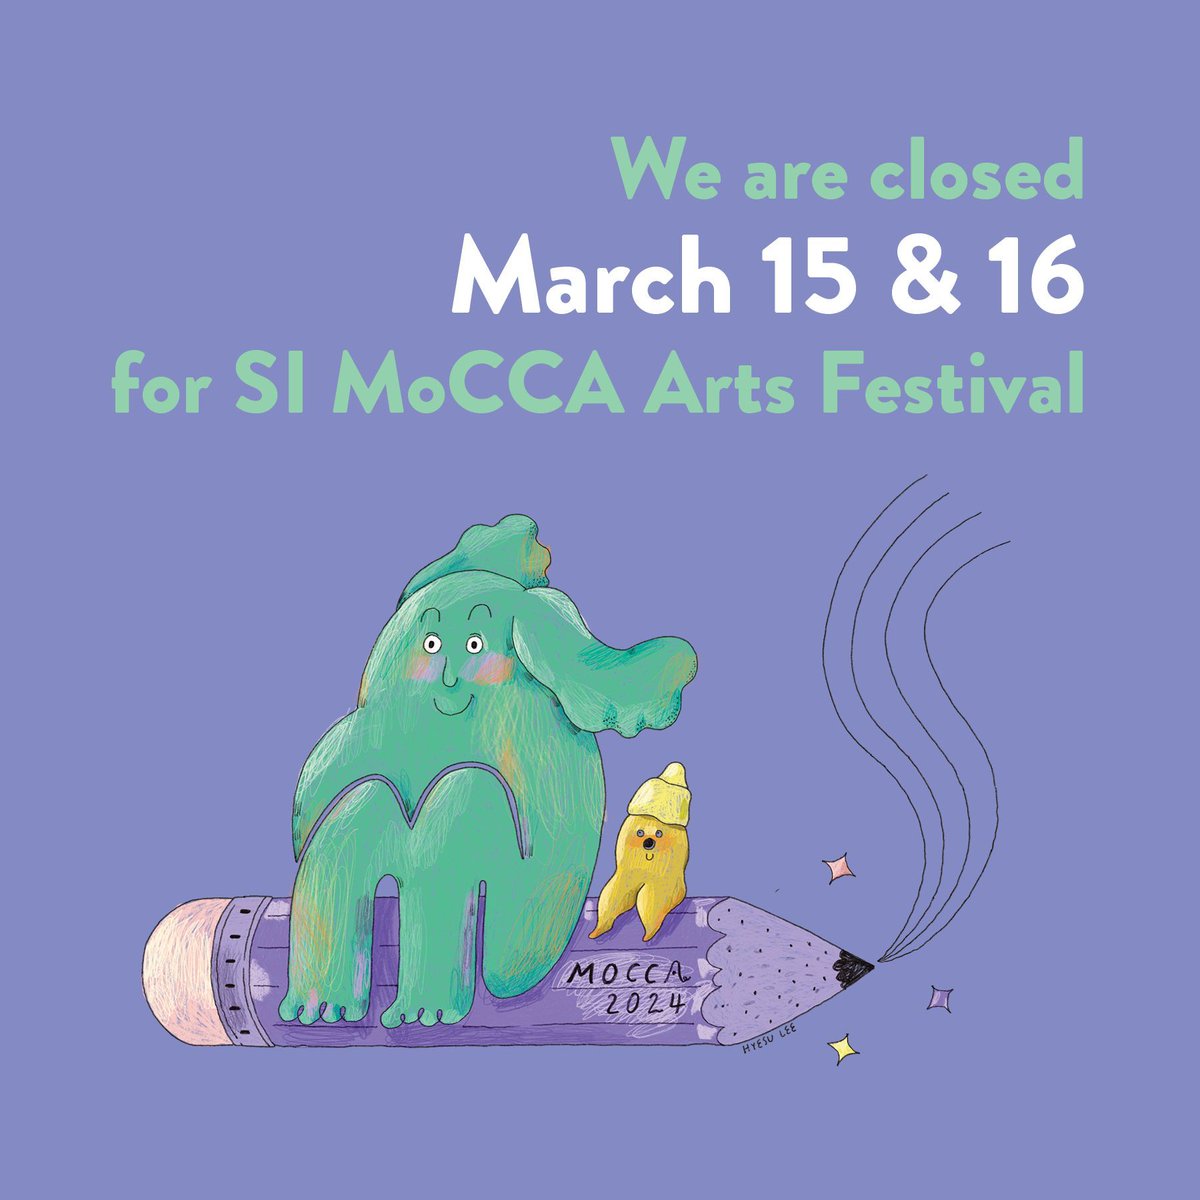 The Society of Illustrators is closed today and tomorrow for SI MoCCA Arts Festival! We hope you will join us at Metropolitan Pavilion this weekend! Click here for tickets: buff.ly/3TbdtFG